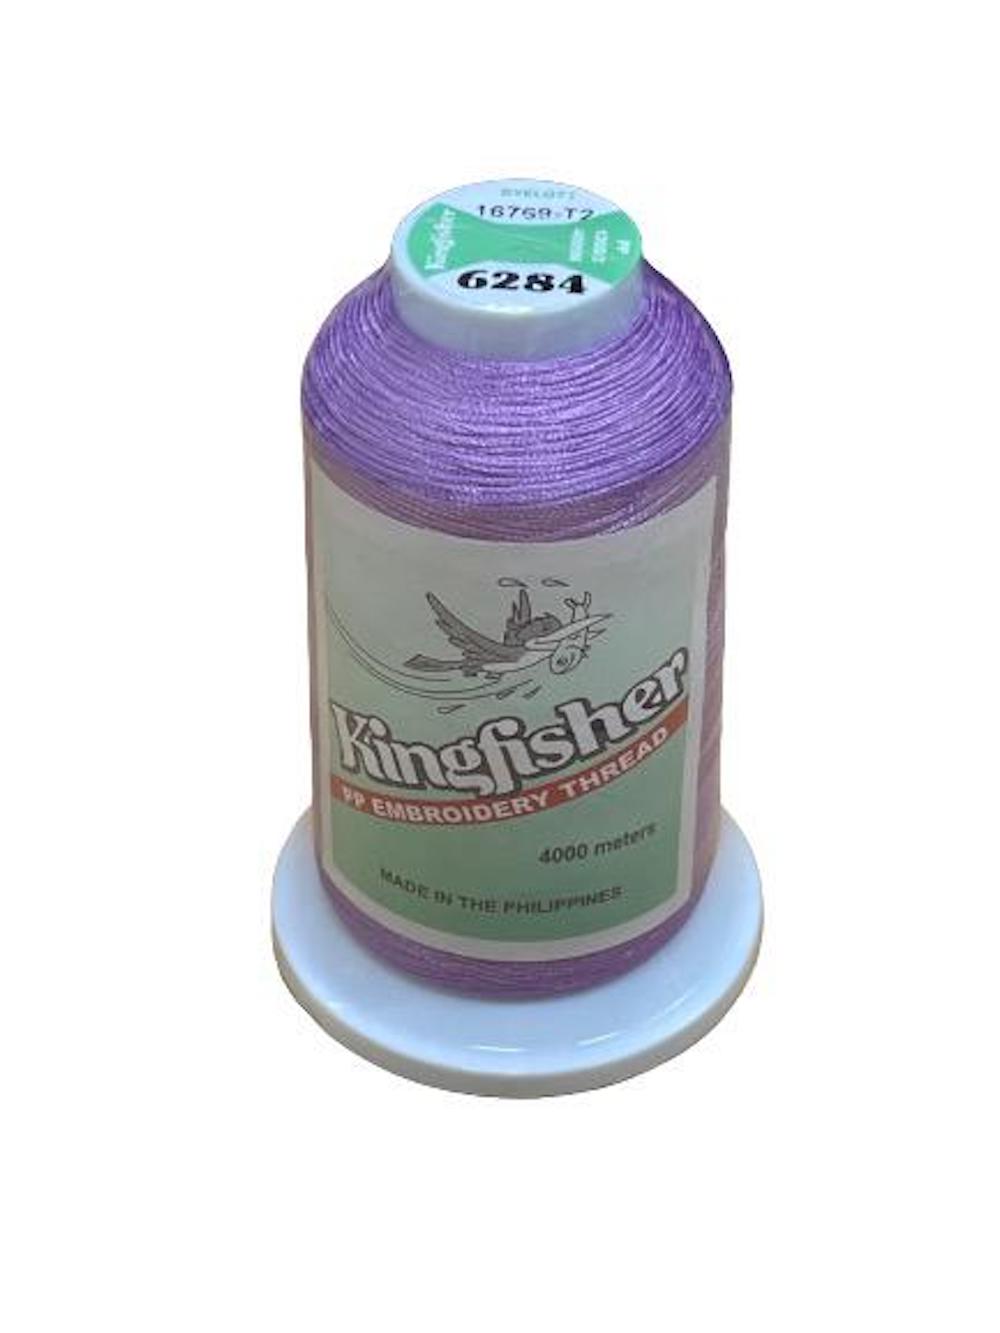 King Fisher Embroidery Thread 4000m 6284 - MY SEWING MALL